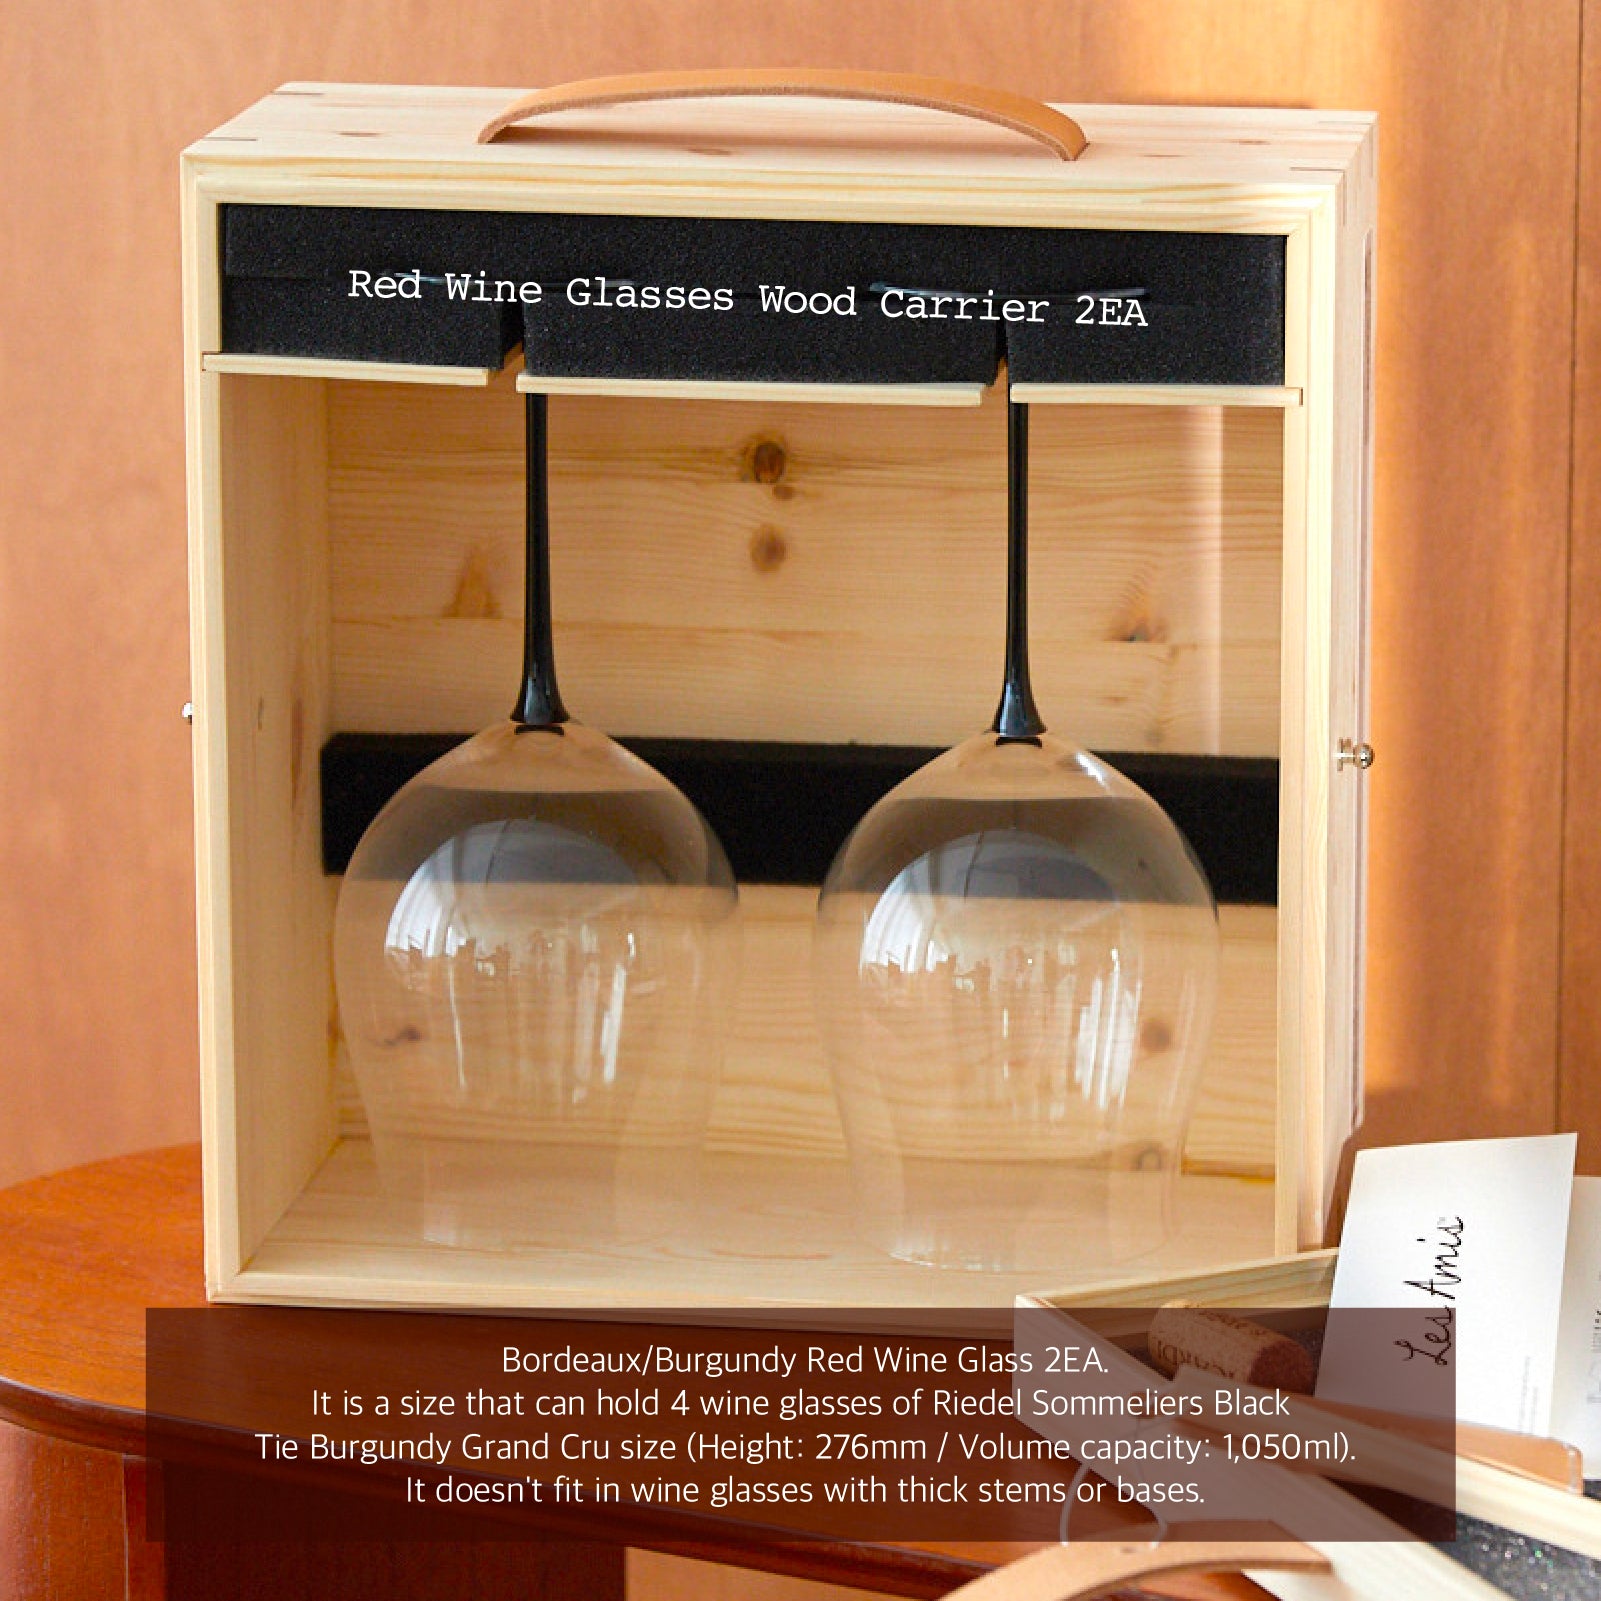 Les Amis Red Wine Glasses Wood Carrier - Slowrecipe